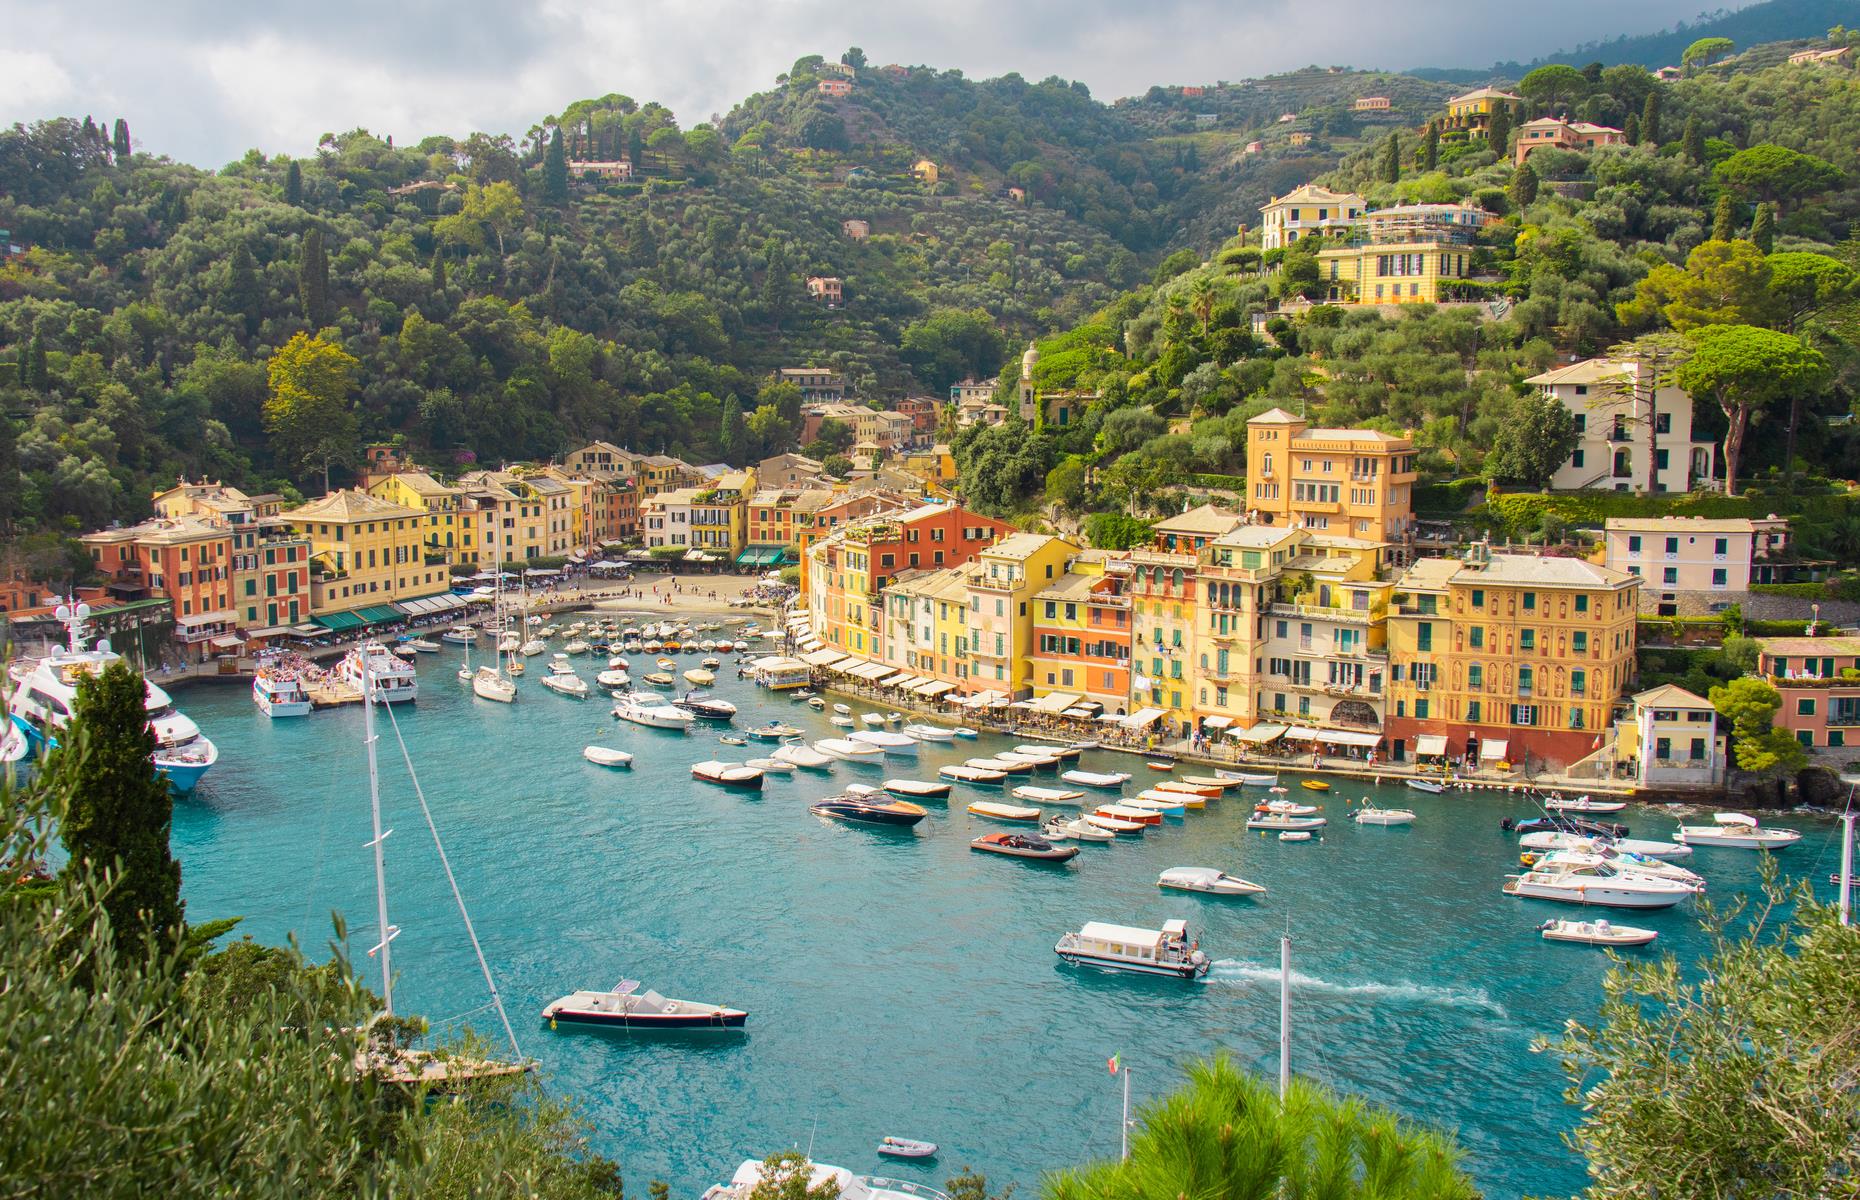 <p>A former fishing village turned fashionable port town, Portofino draws in visitors with its pretty pastel-colored houses and honeysuckle-clad hills overlooking a dazzling harbor. Situated on its own peninsula on the northeast coast of Italy, it’s the perfect spot for panoramic views over the Italian Riviera.</p>